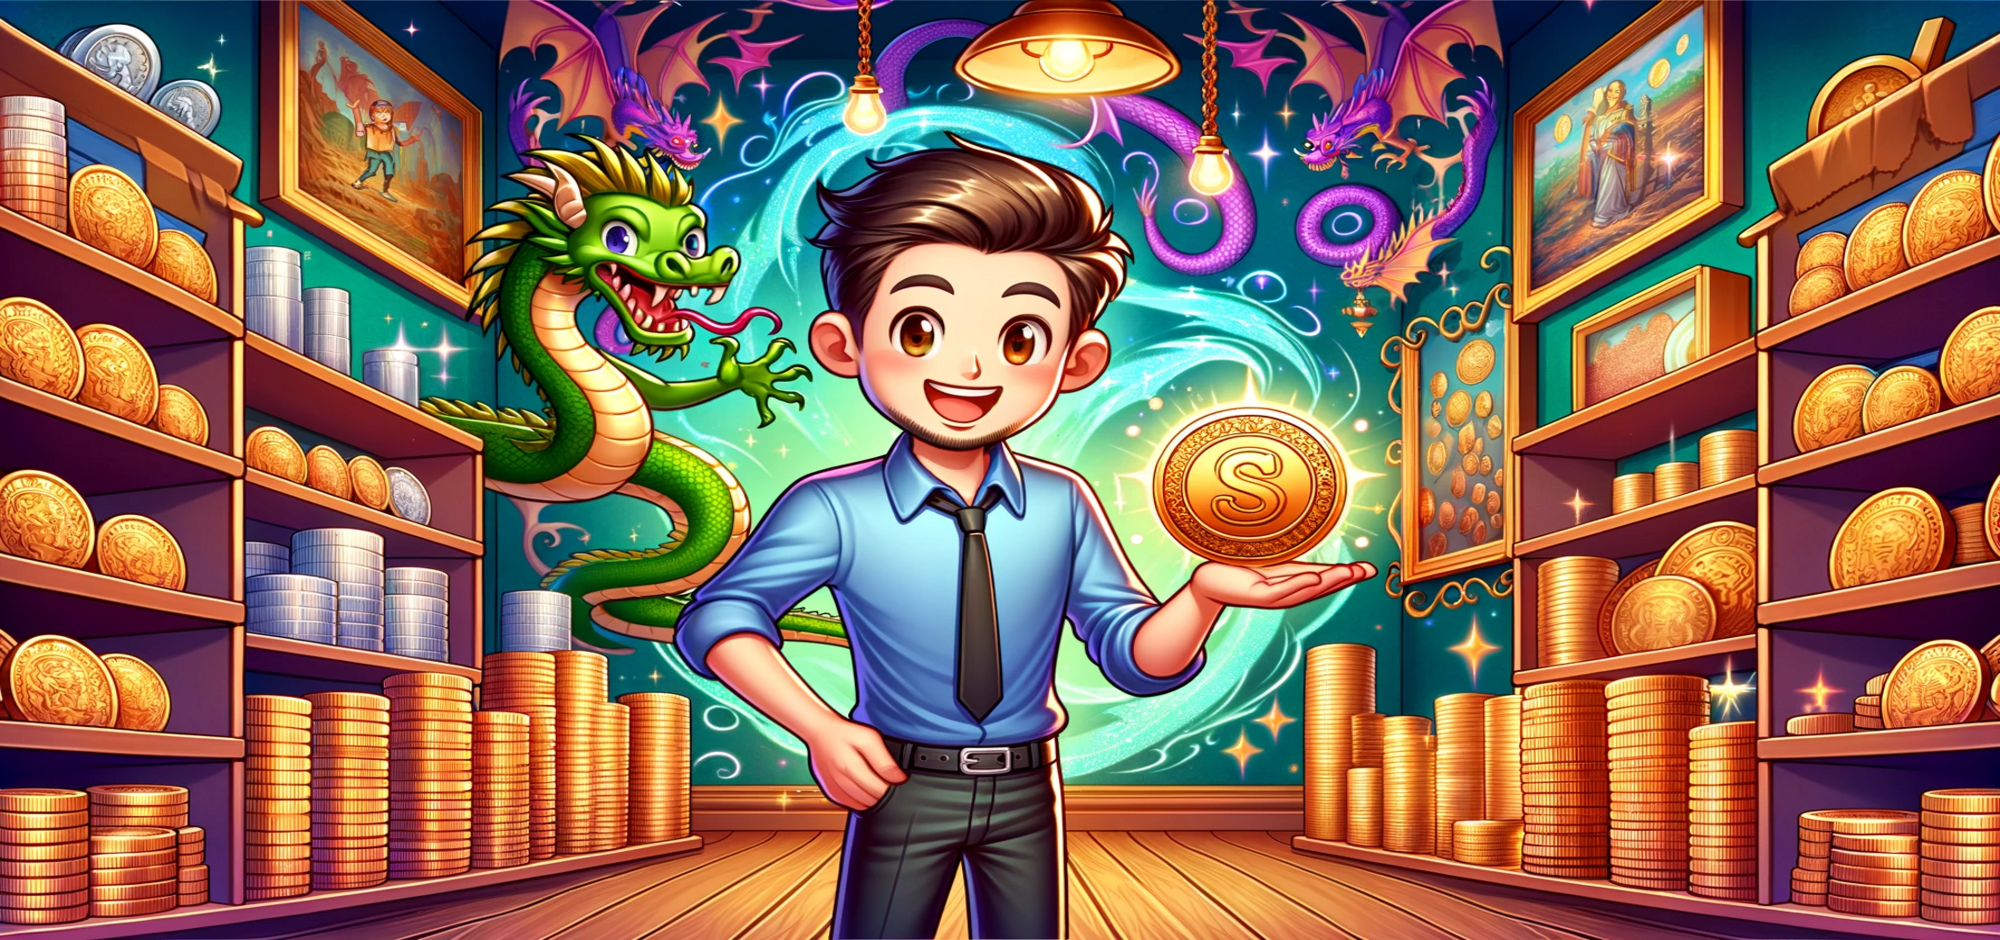 An animated scene of a coin enthusiast holding a mystic coin, with a friendly dragon peeking over sh